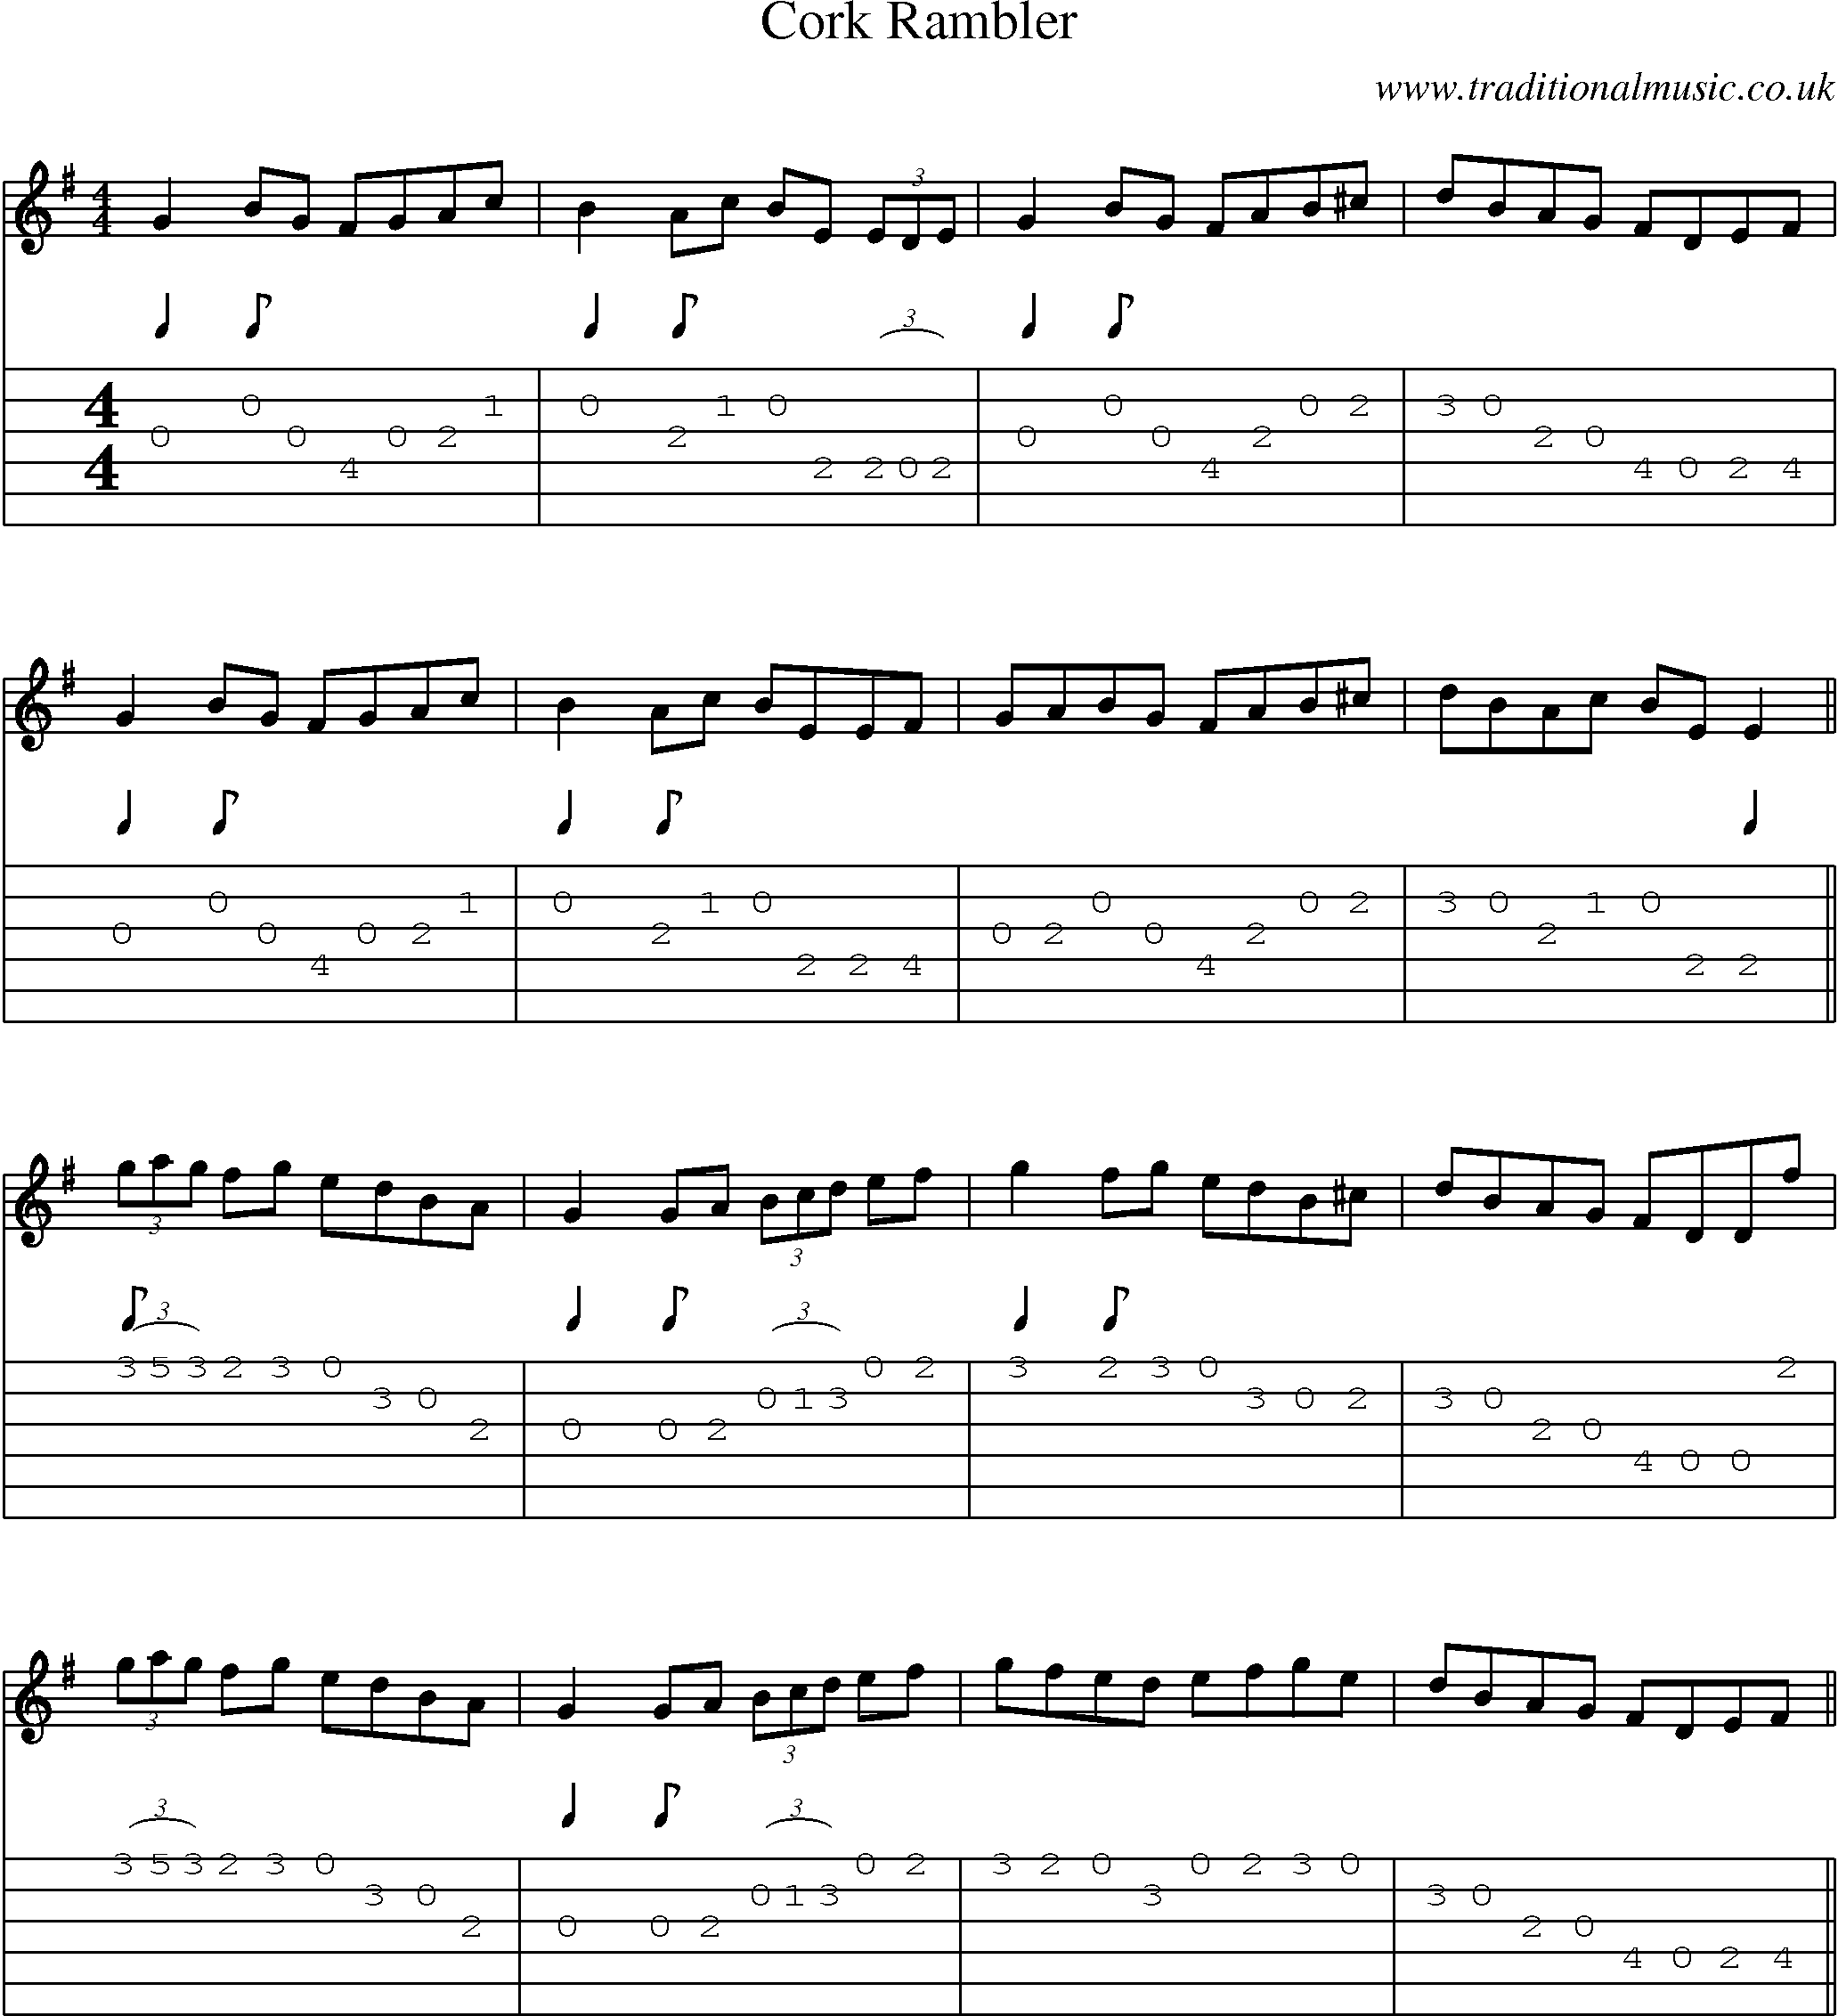 Music Score and Guitar Tabs for Cork Rambler